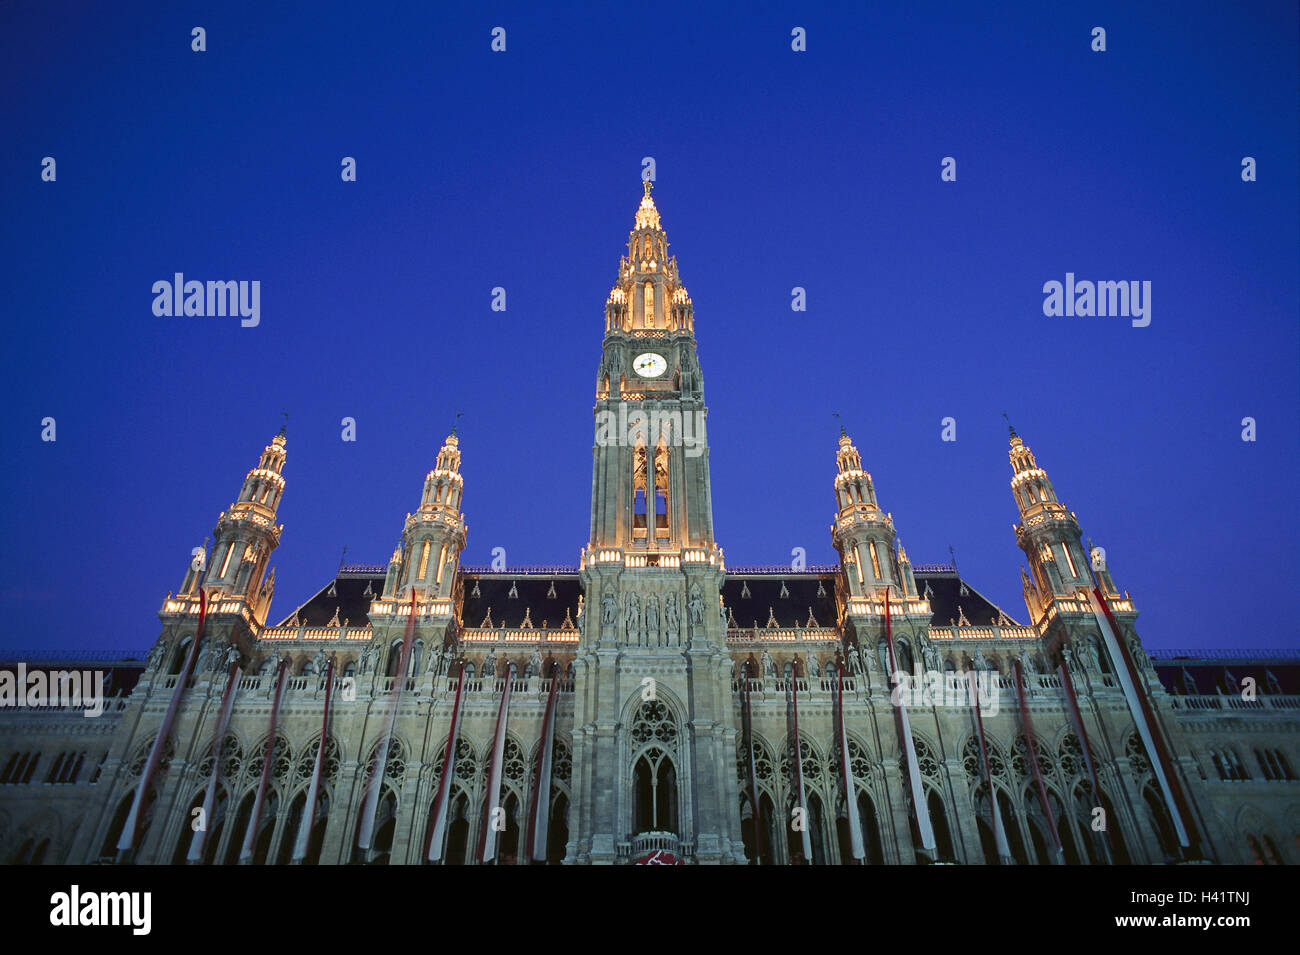 Austria, Vienna, city hall, lighting, evening, from below, Europe, capital, city hall building, structure, in 1872-83, builder Friedrich von Schmidt, architectural style, architecture, new Gothic, tower height 97.9 m, facade, flags, national flags, flags, landmarks, place of interest, culture, perspective, splendour construction, wealth, power, incredibly, imposingly, rule, impressively, night Stock Photo